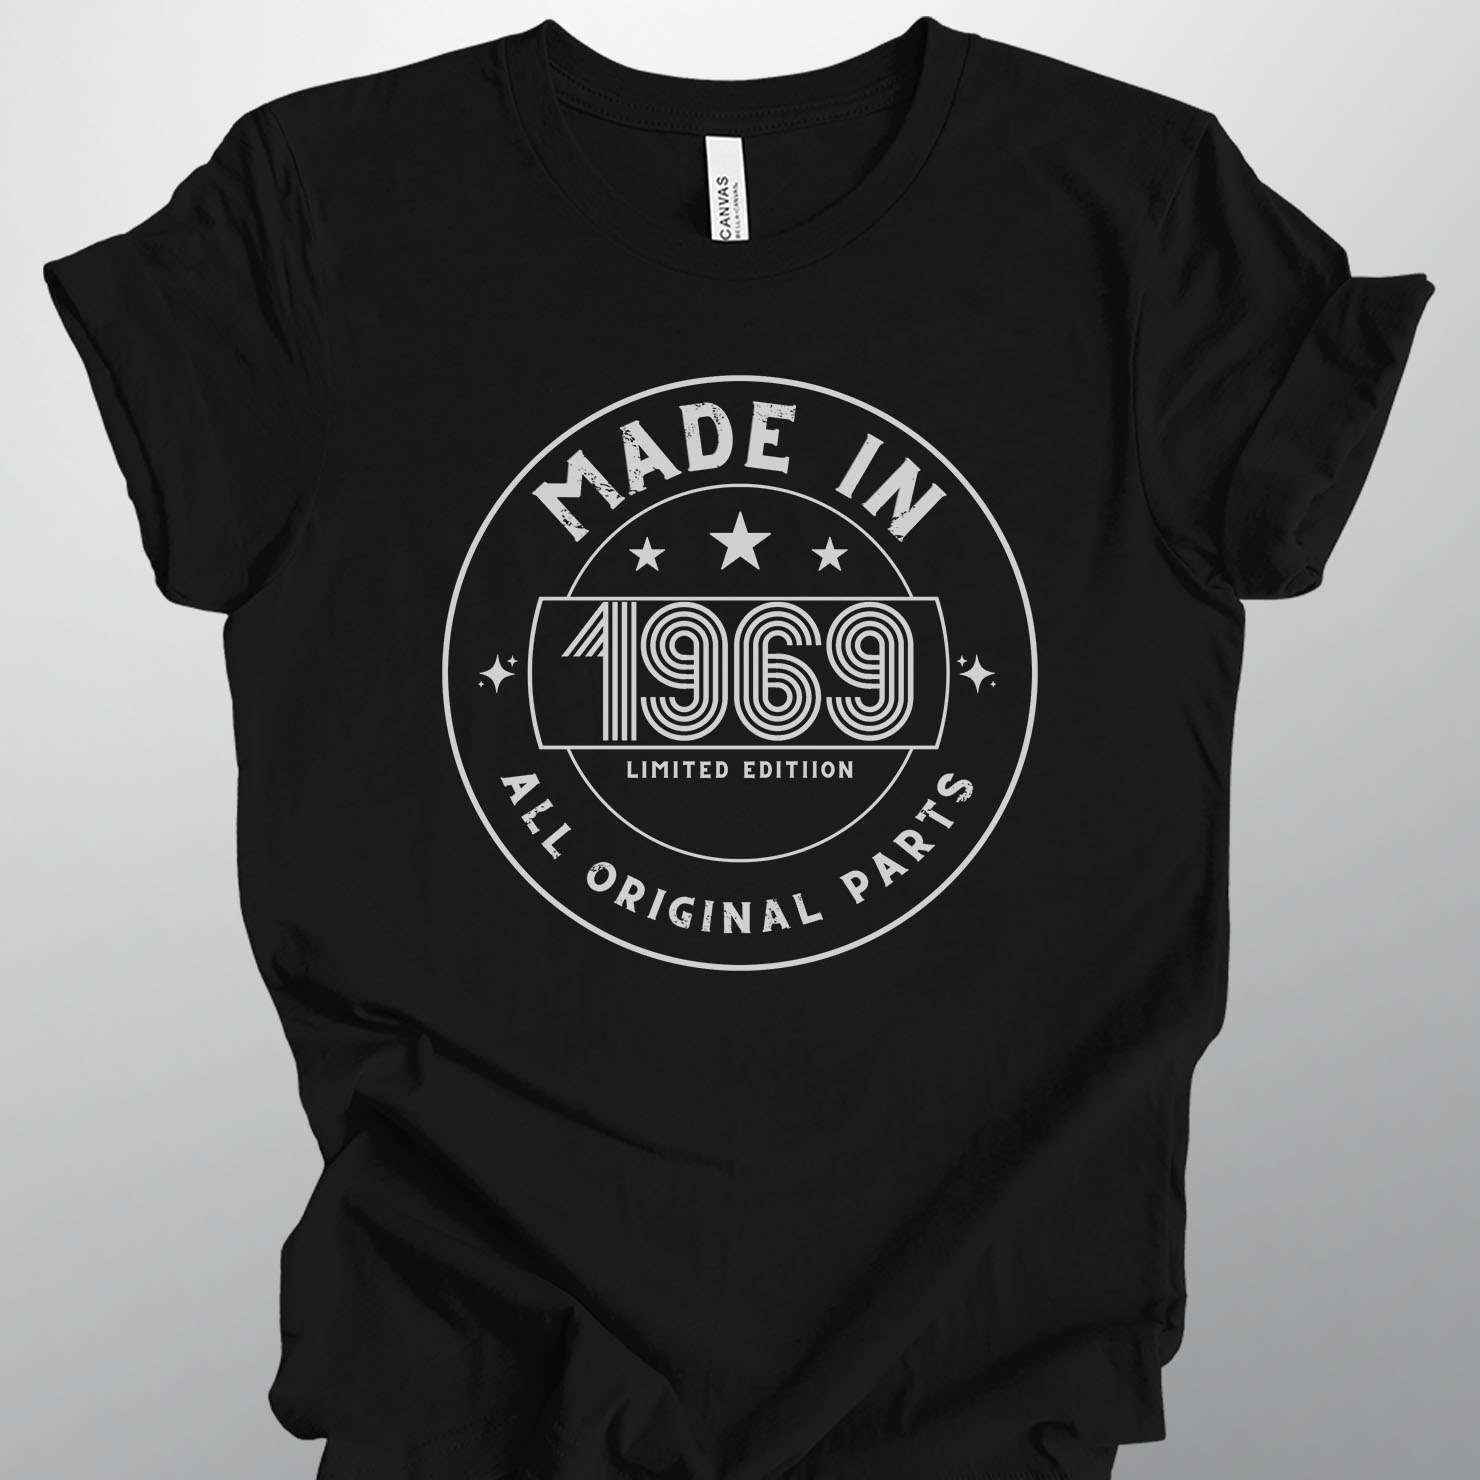 customizable t-shirt featuring year 1969 that you can edit